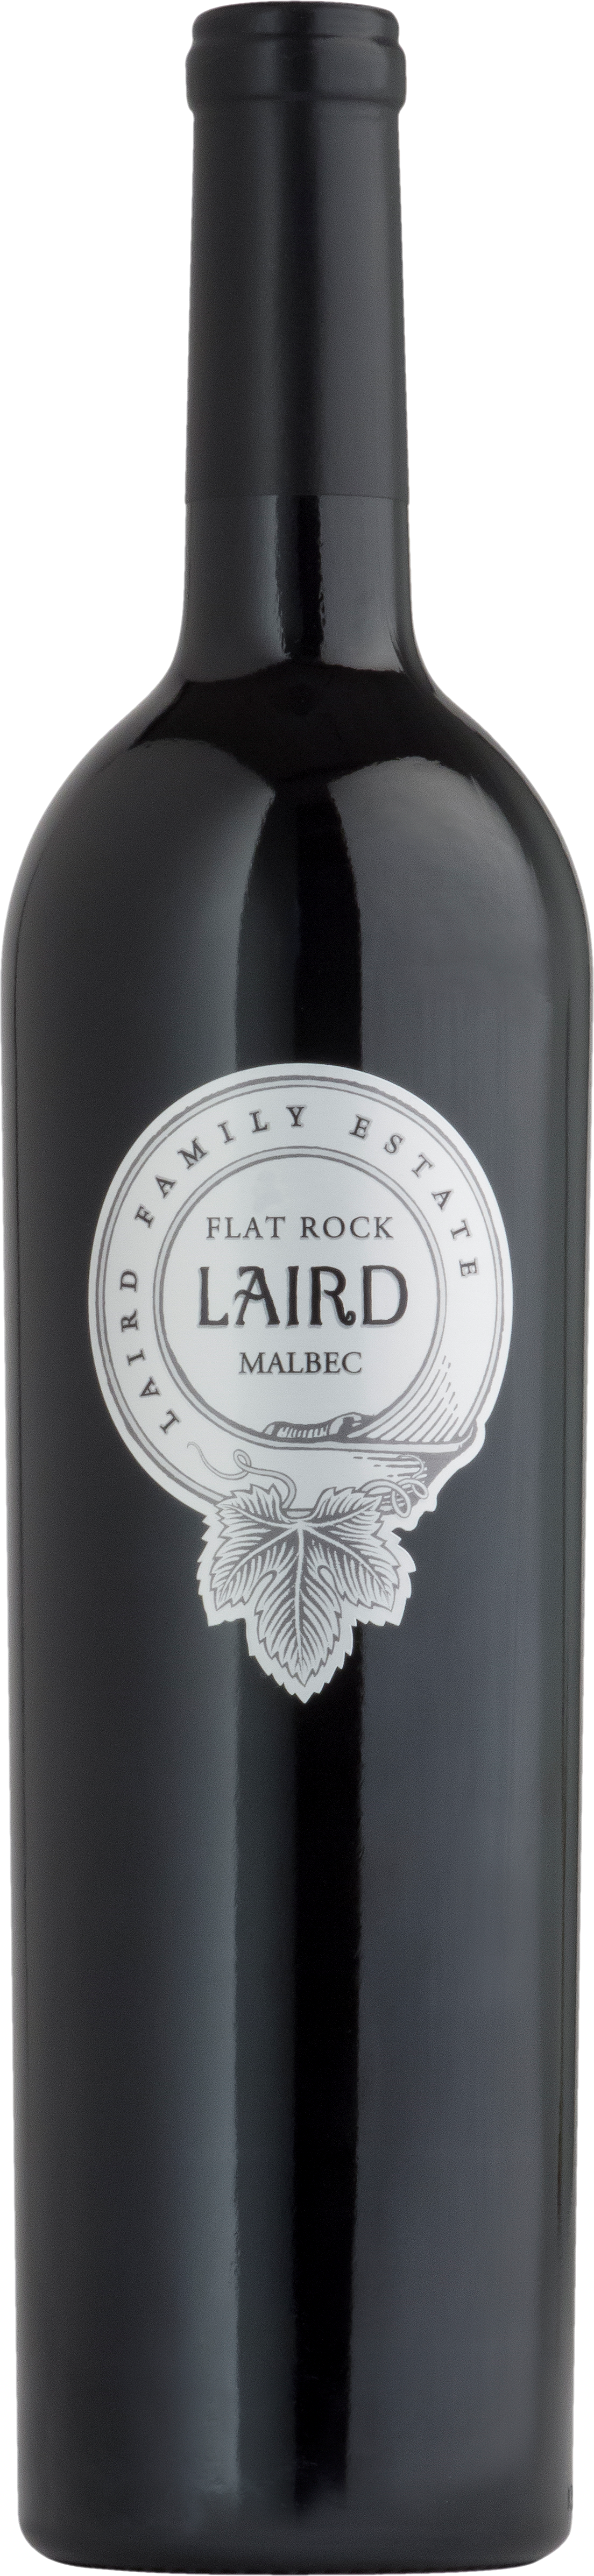 Product Image for 2017 Flat Rock Ranch Malbec